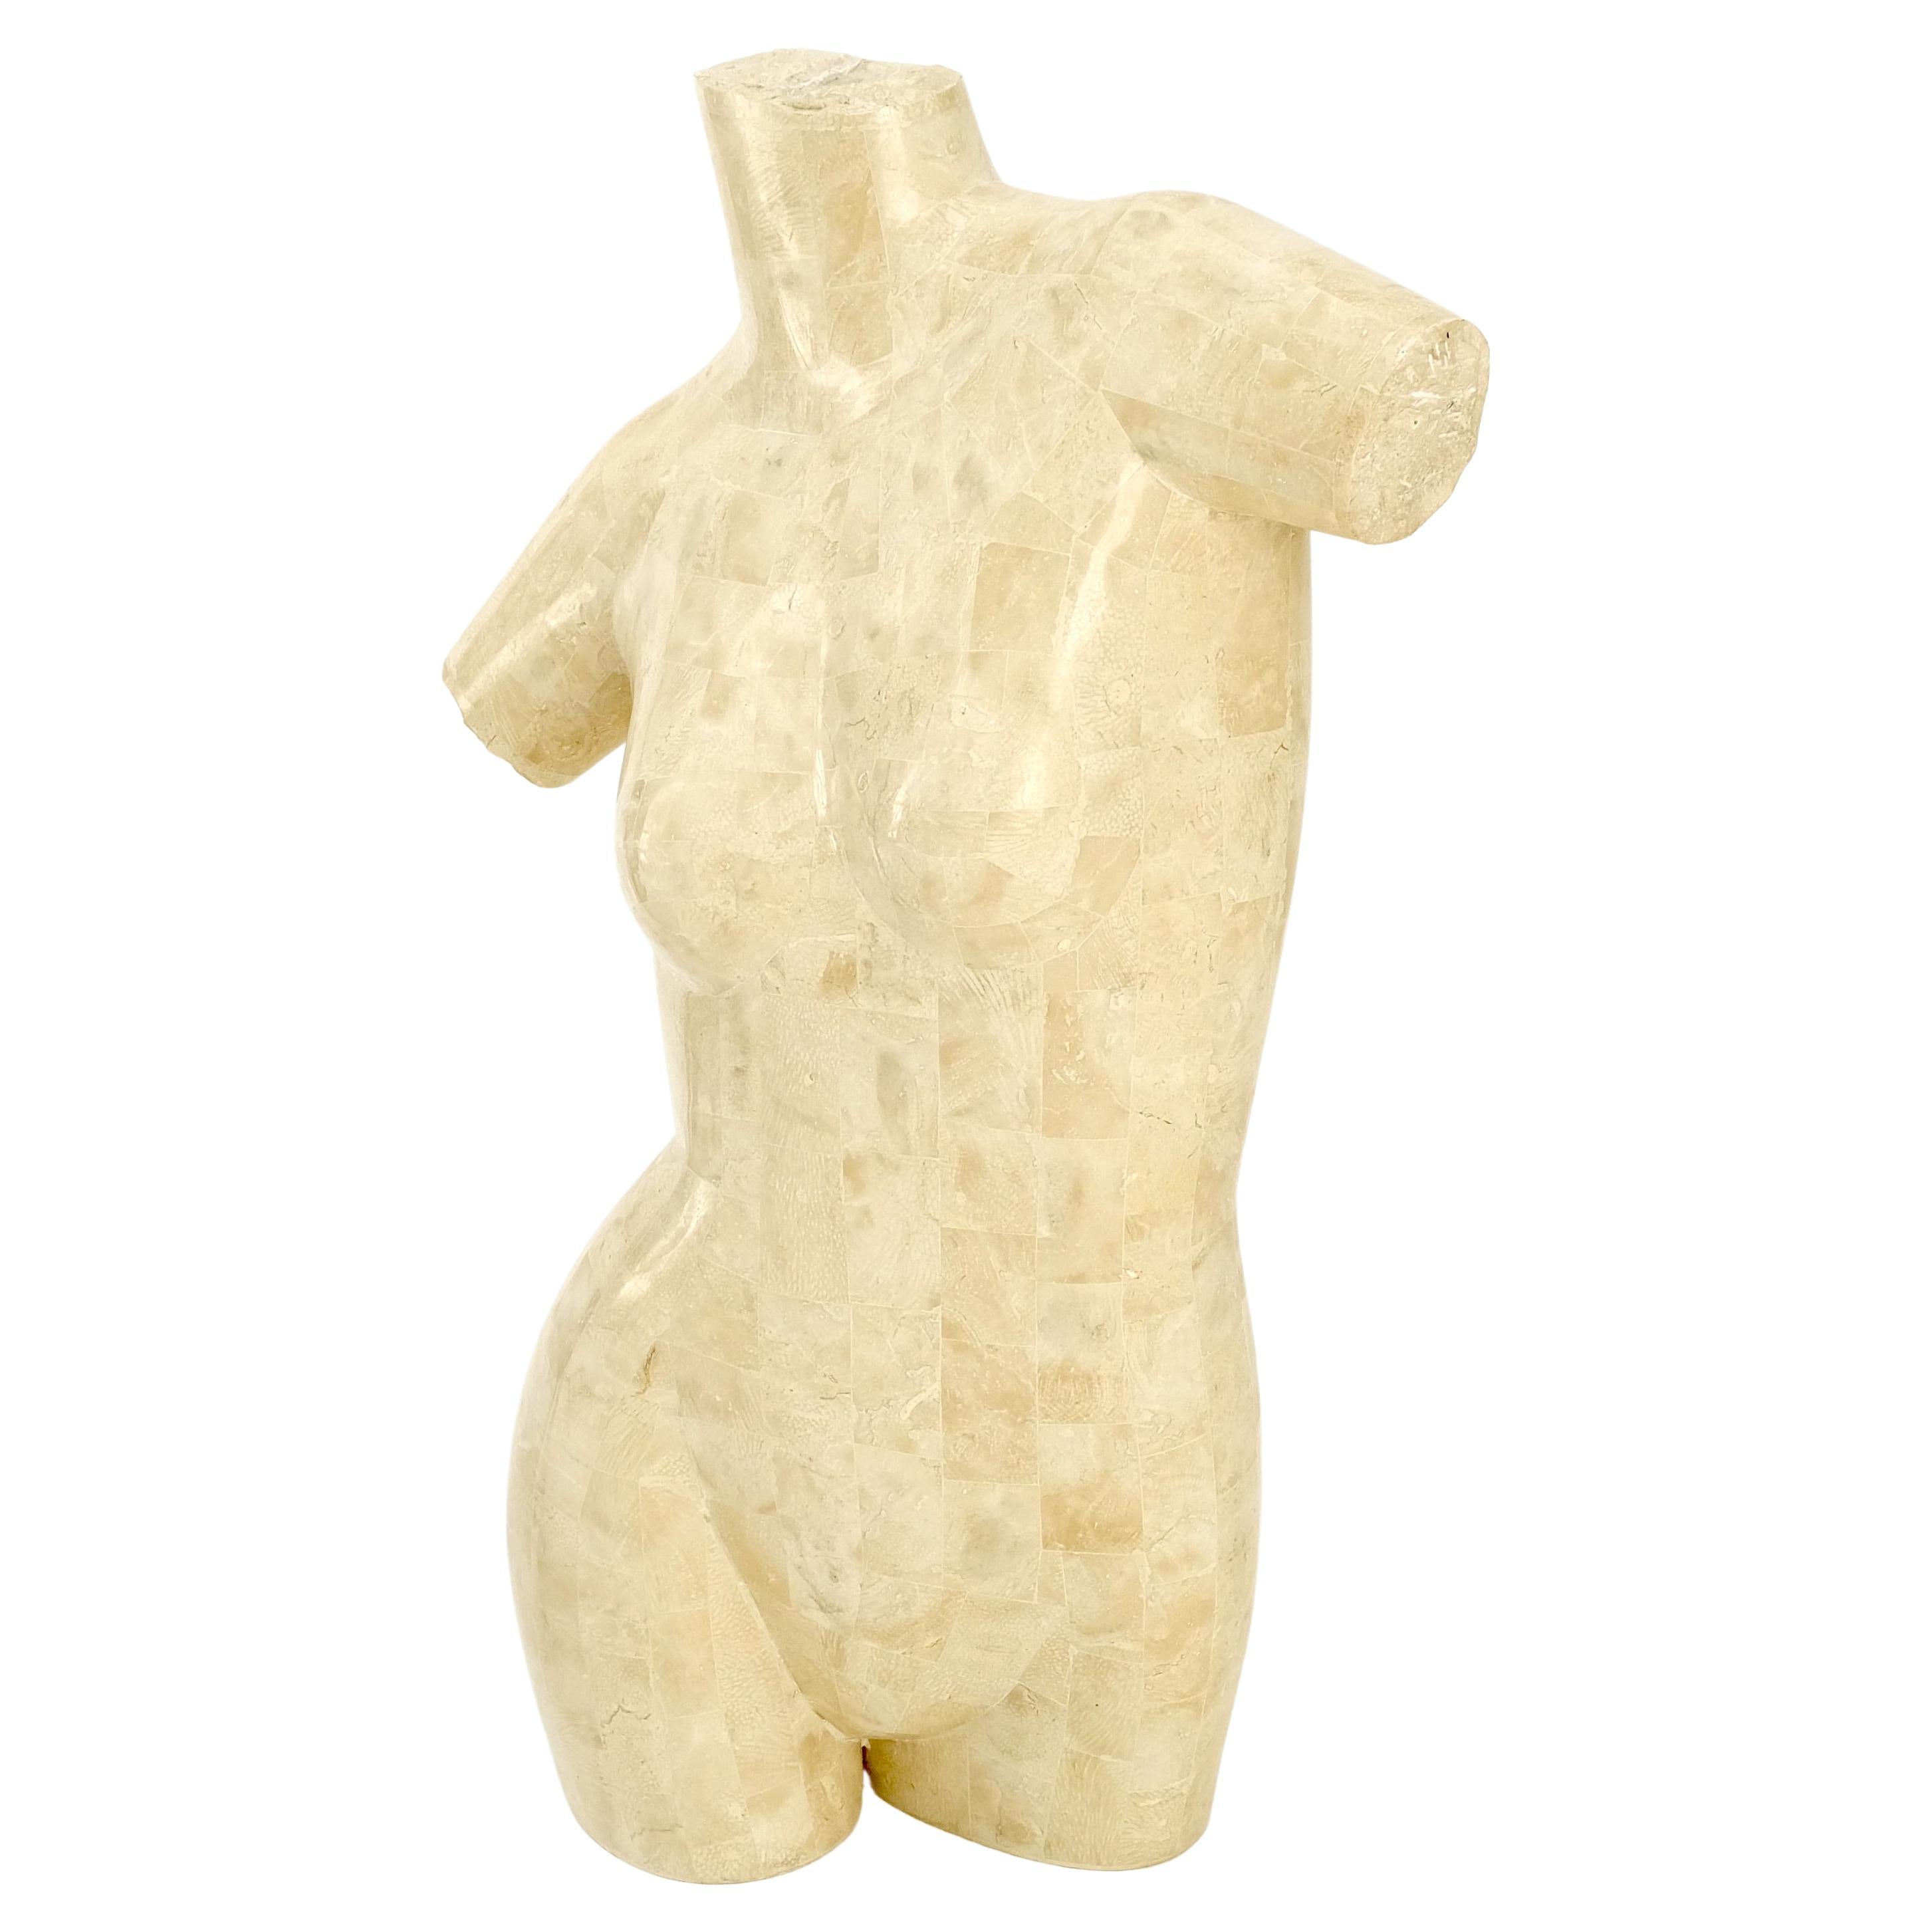 Tessellated Stone Marble Travertine Sculpture of Nude Female Torso Mint! For Sale